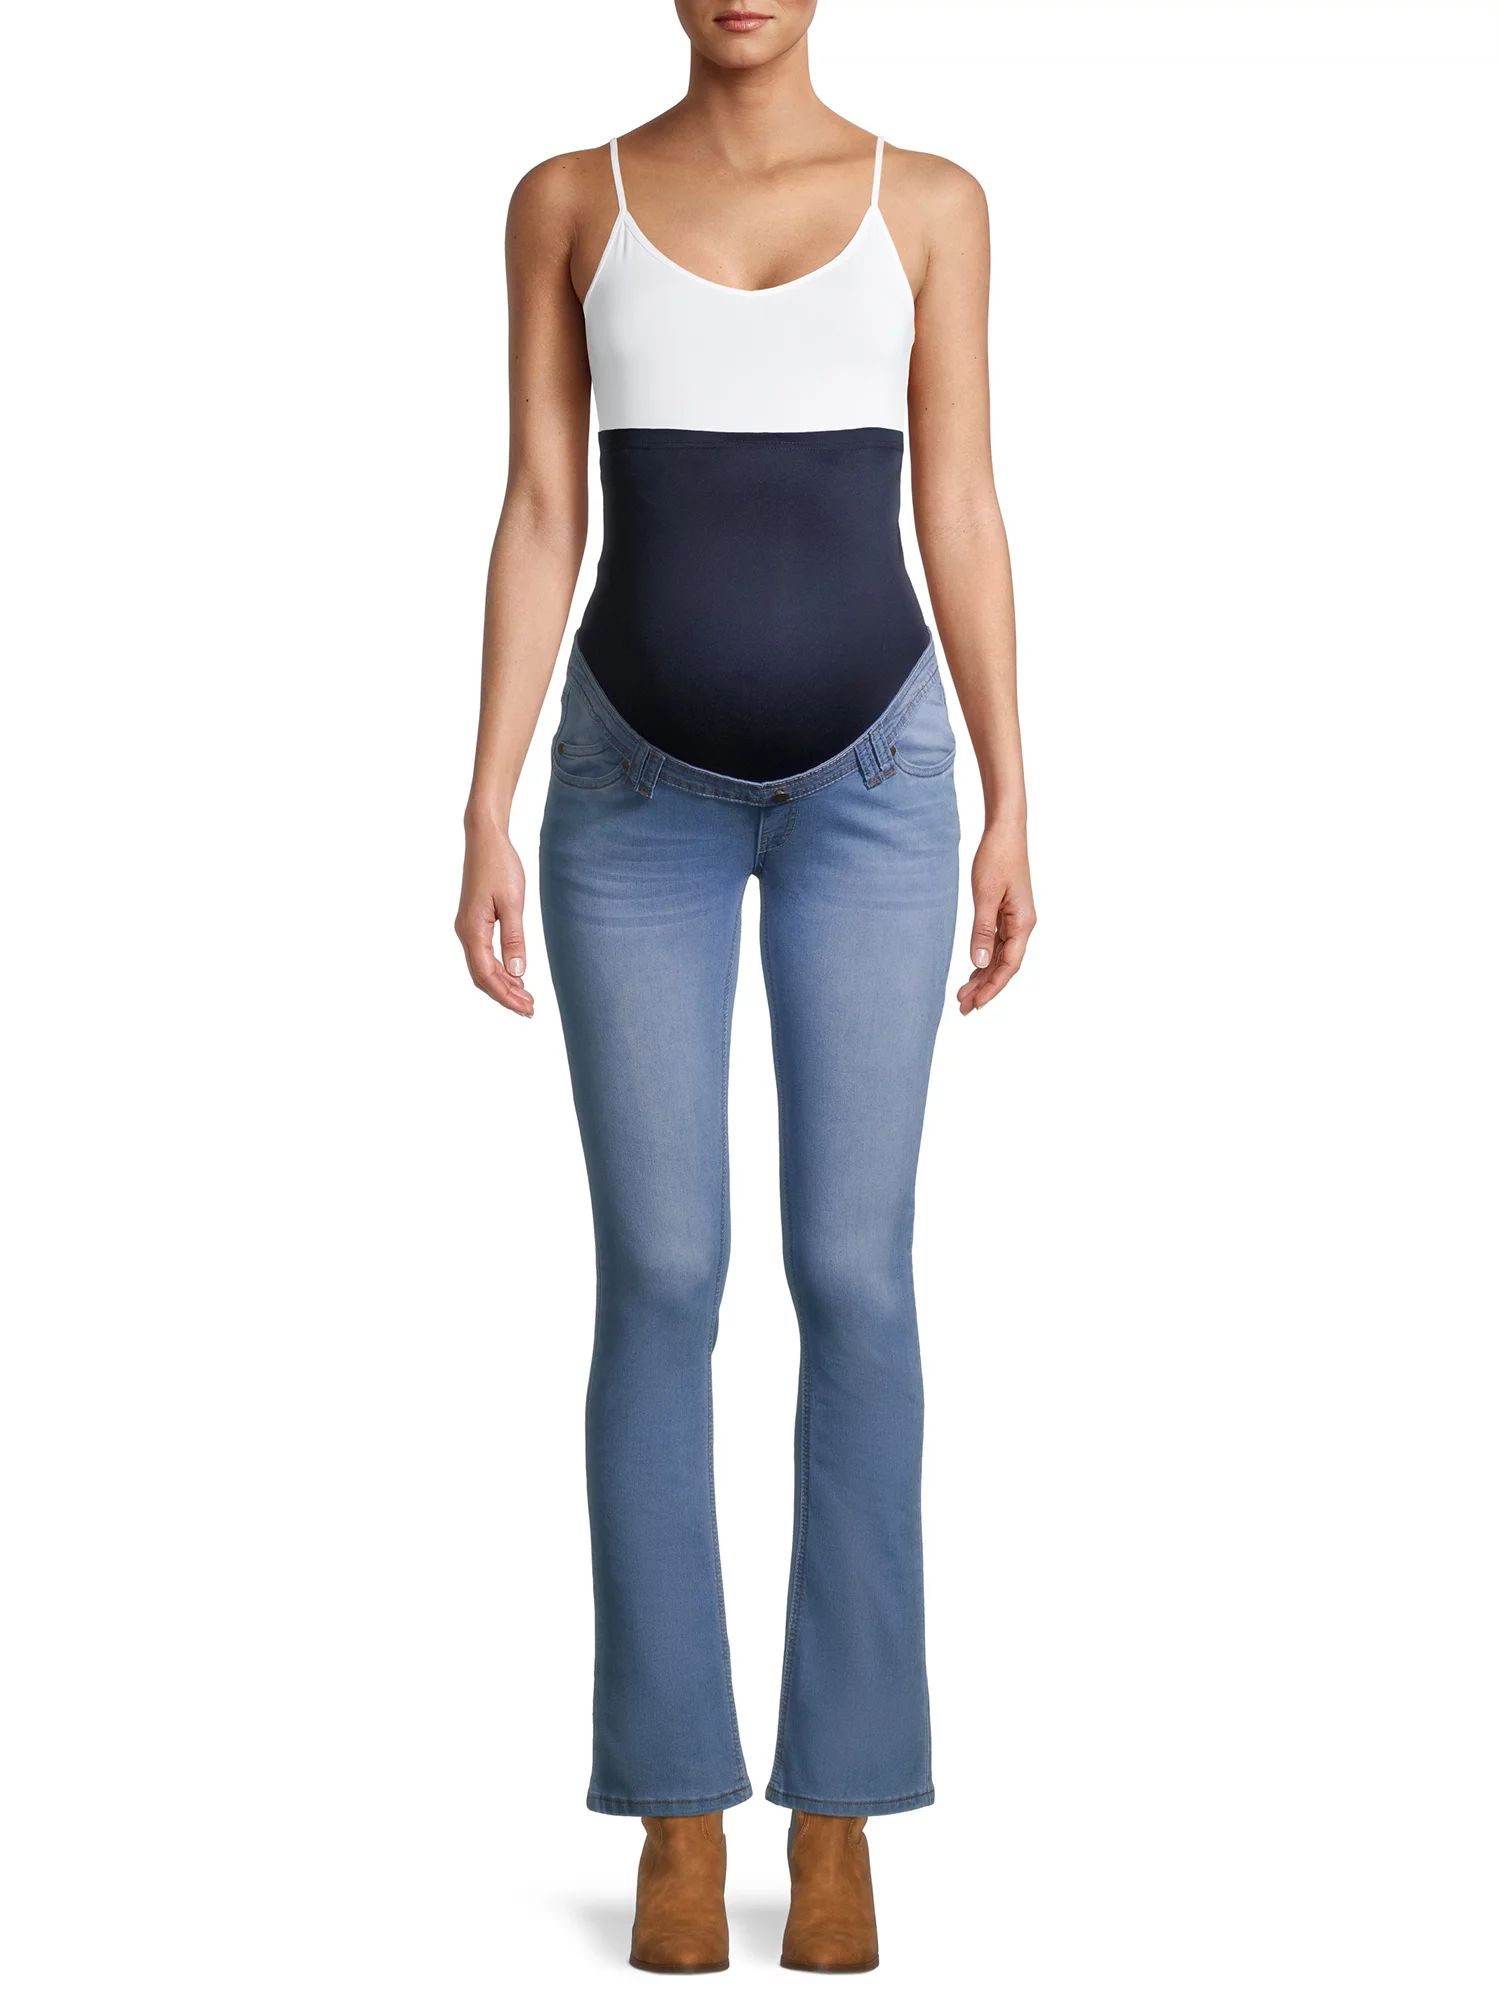 Oh! Mamma Women's Maternity Bootleg Jeans with Full Panel and Belted Detail | Walmart (US)